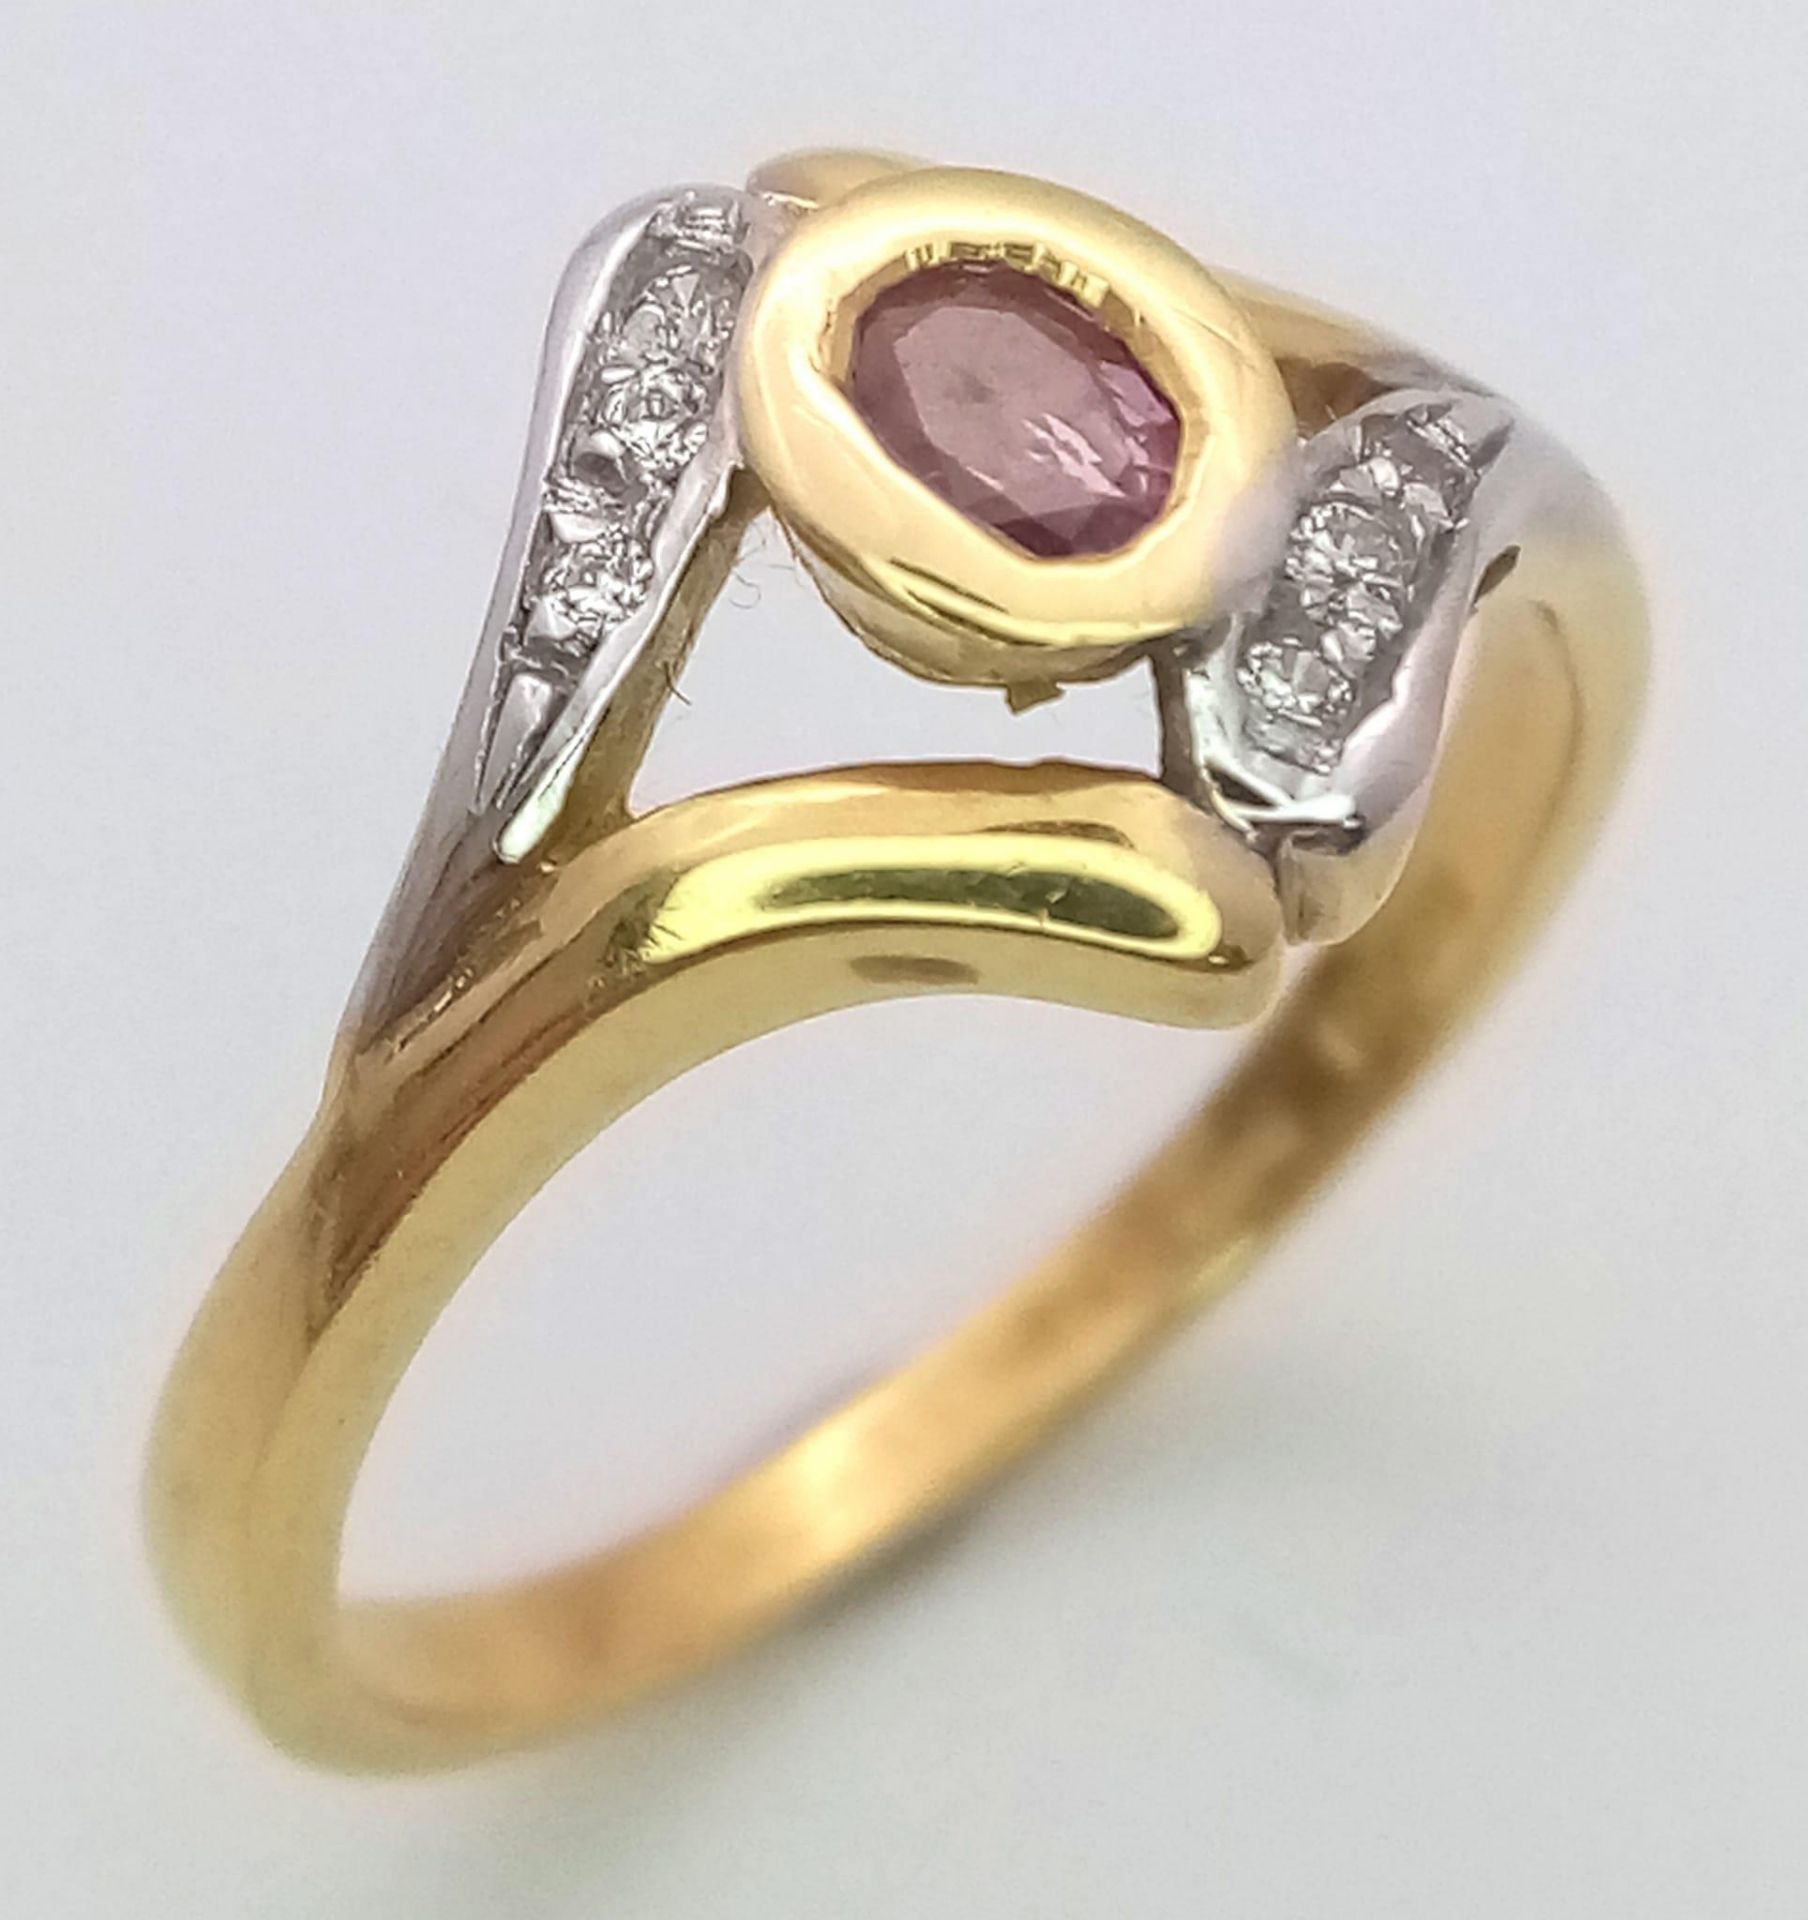 AN ATTRACTIVE 18K YELLOW AND WHITE GOLD DIAMOND & PINK SAPPHIRE RING, WEIGHT 3G SIZE M - Image 2 of 8